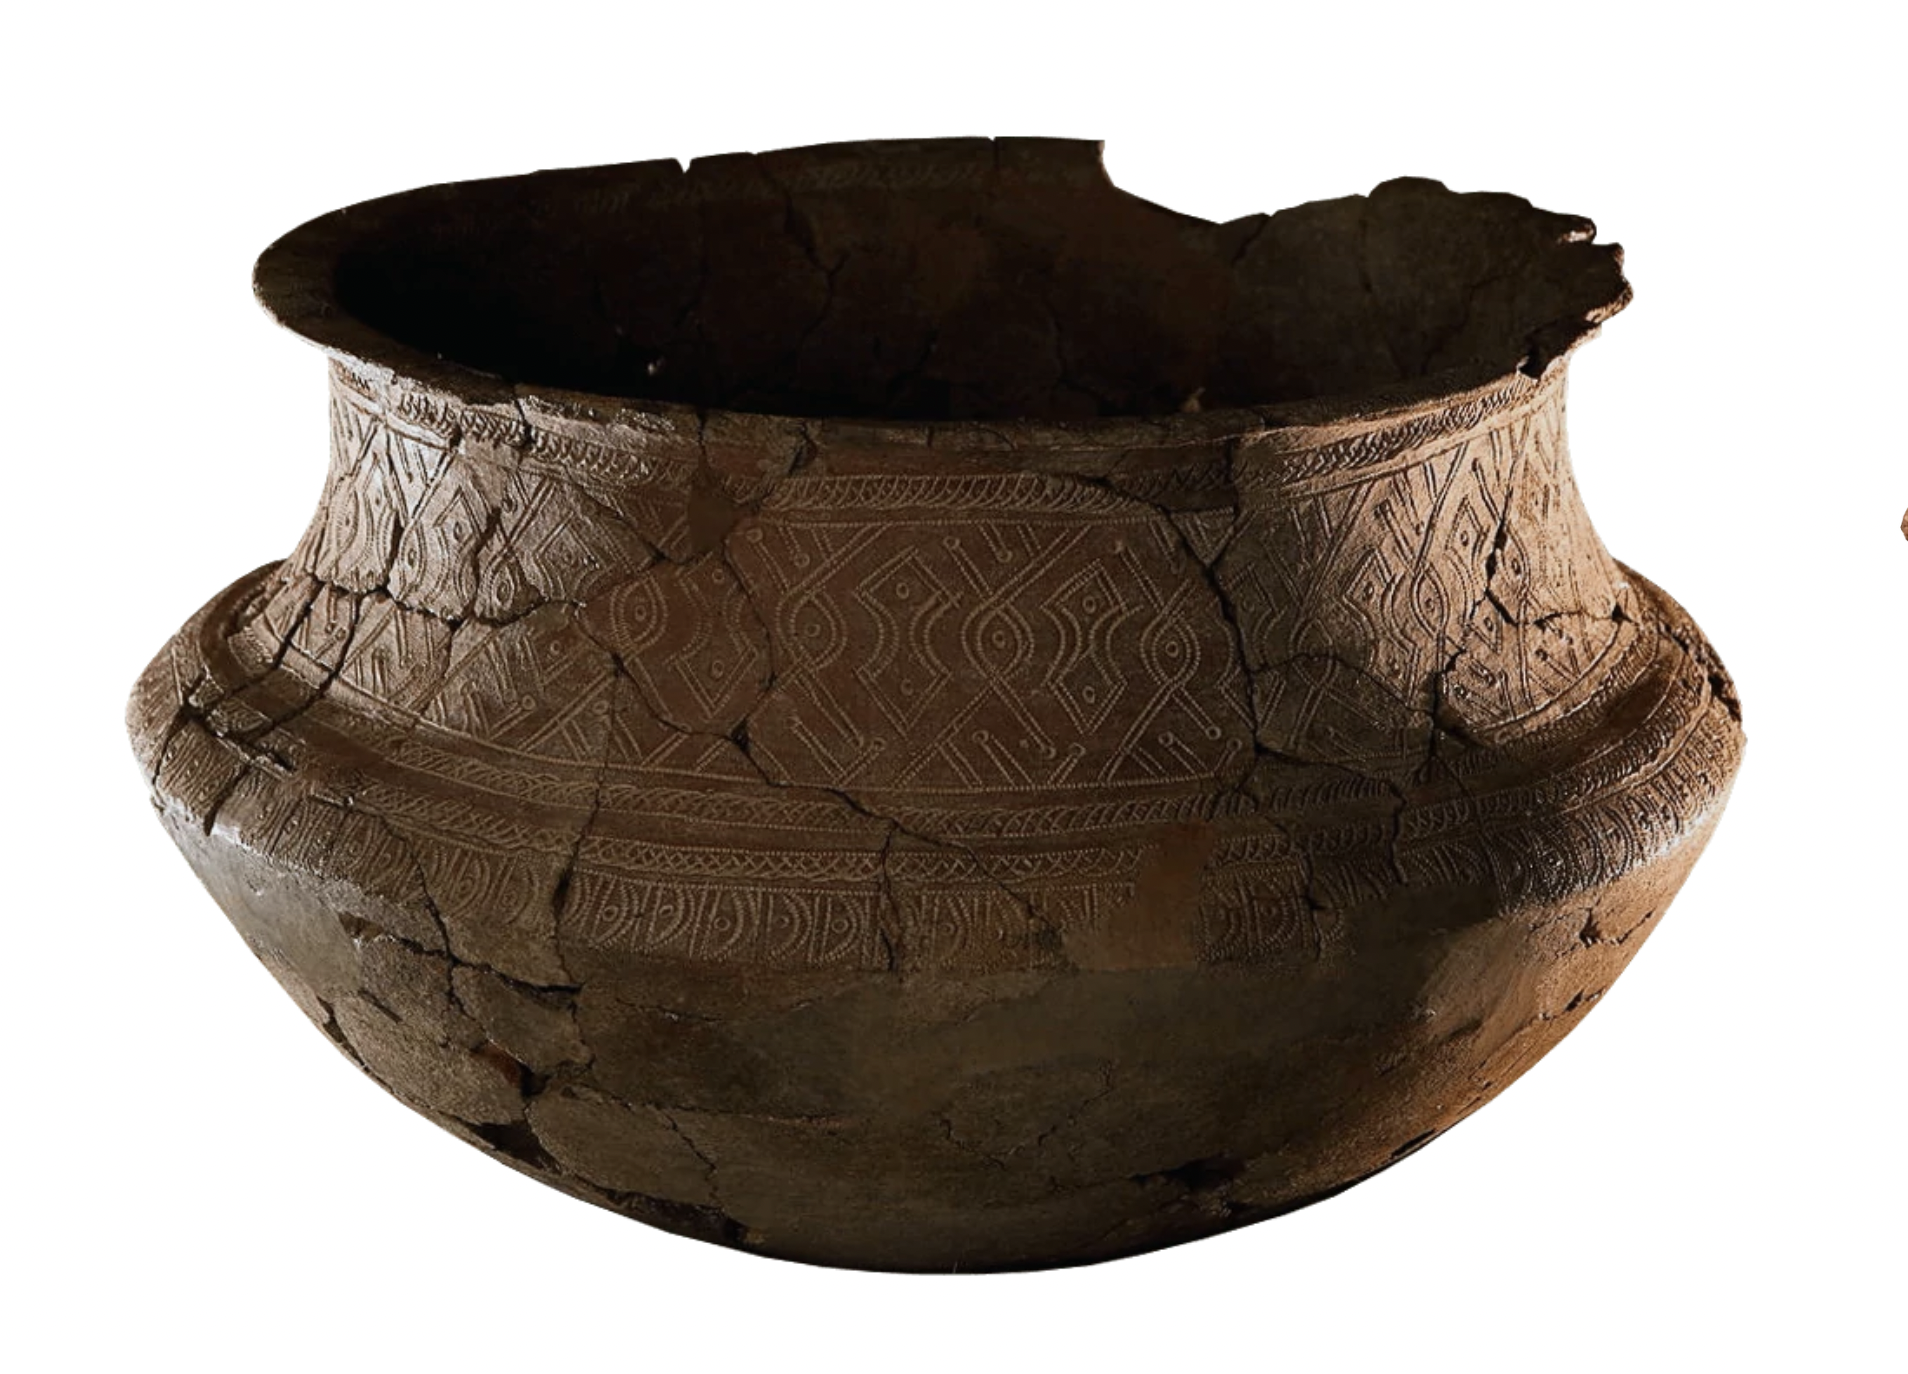 Ceramic cooking pots record history of ancient food practices